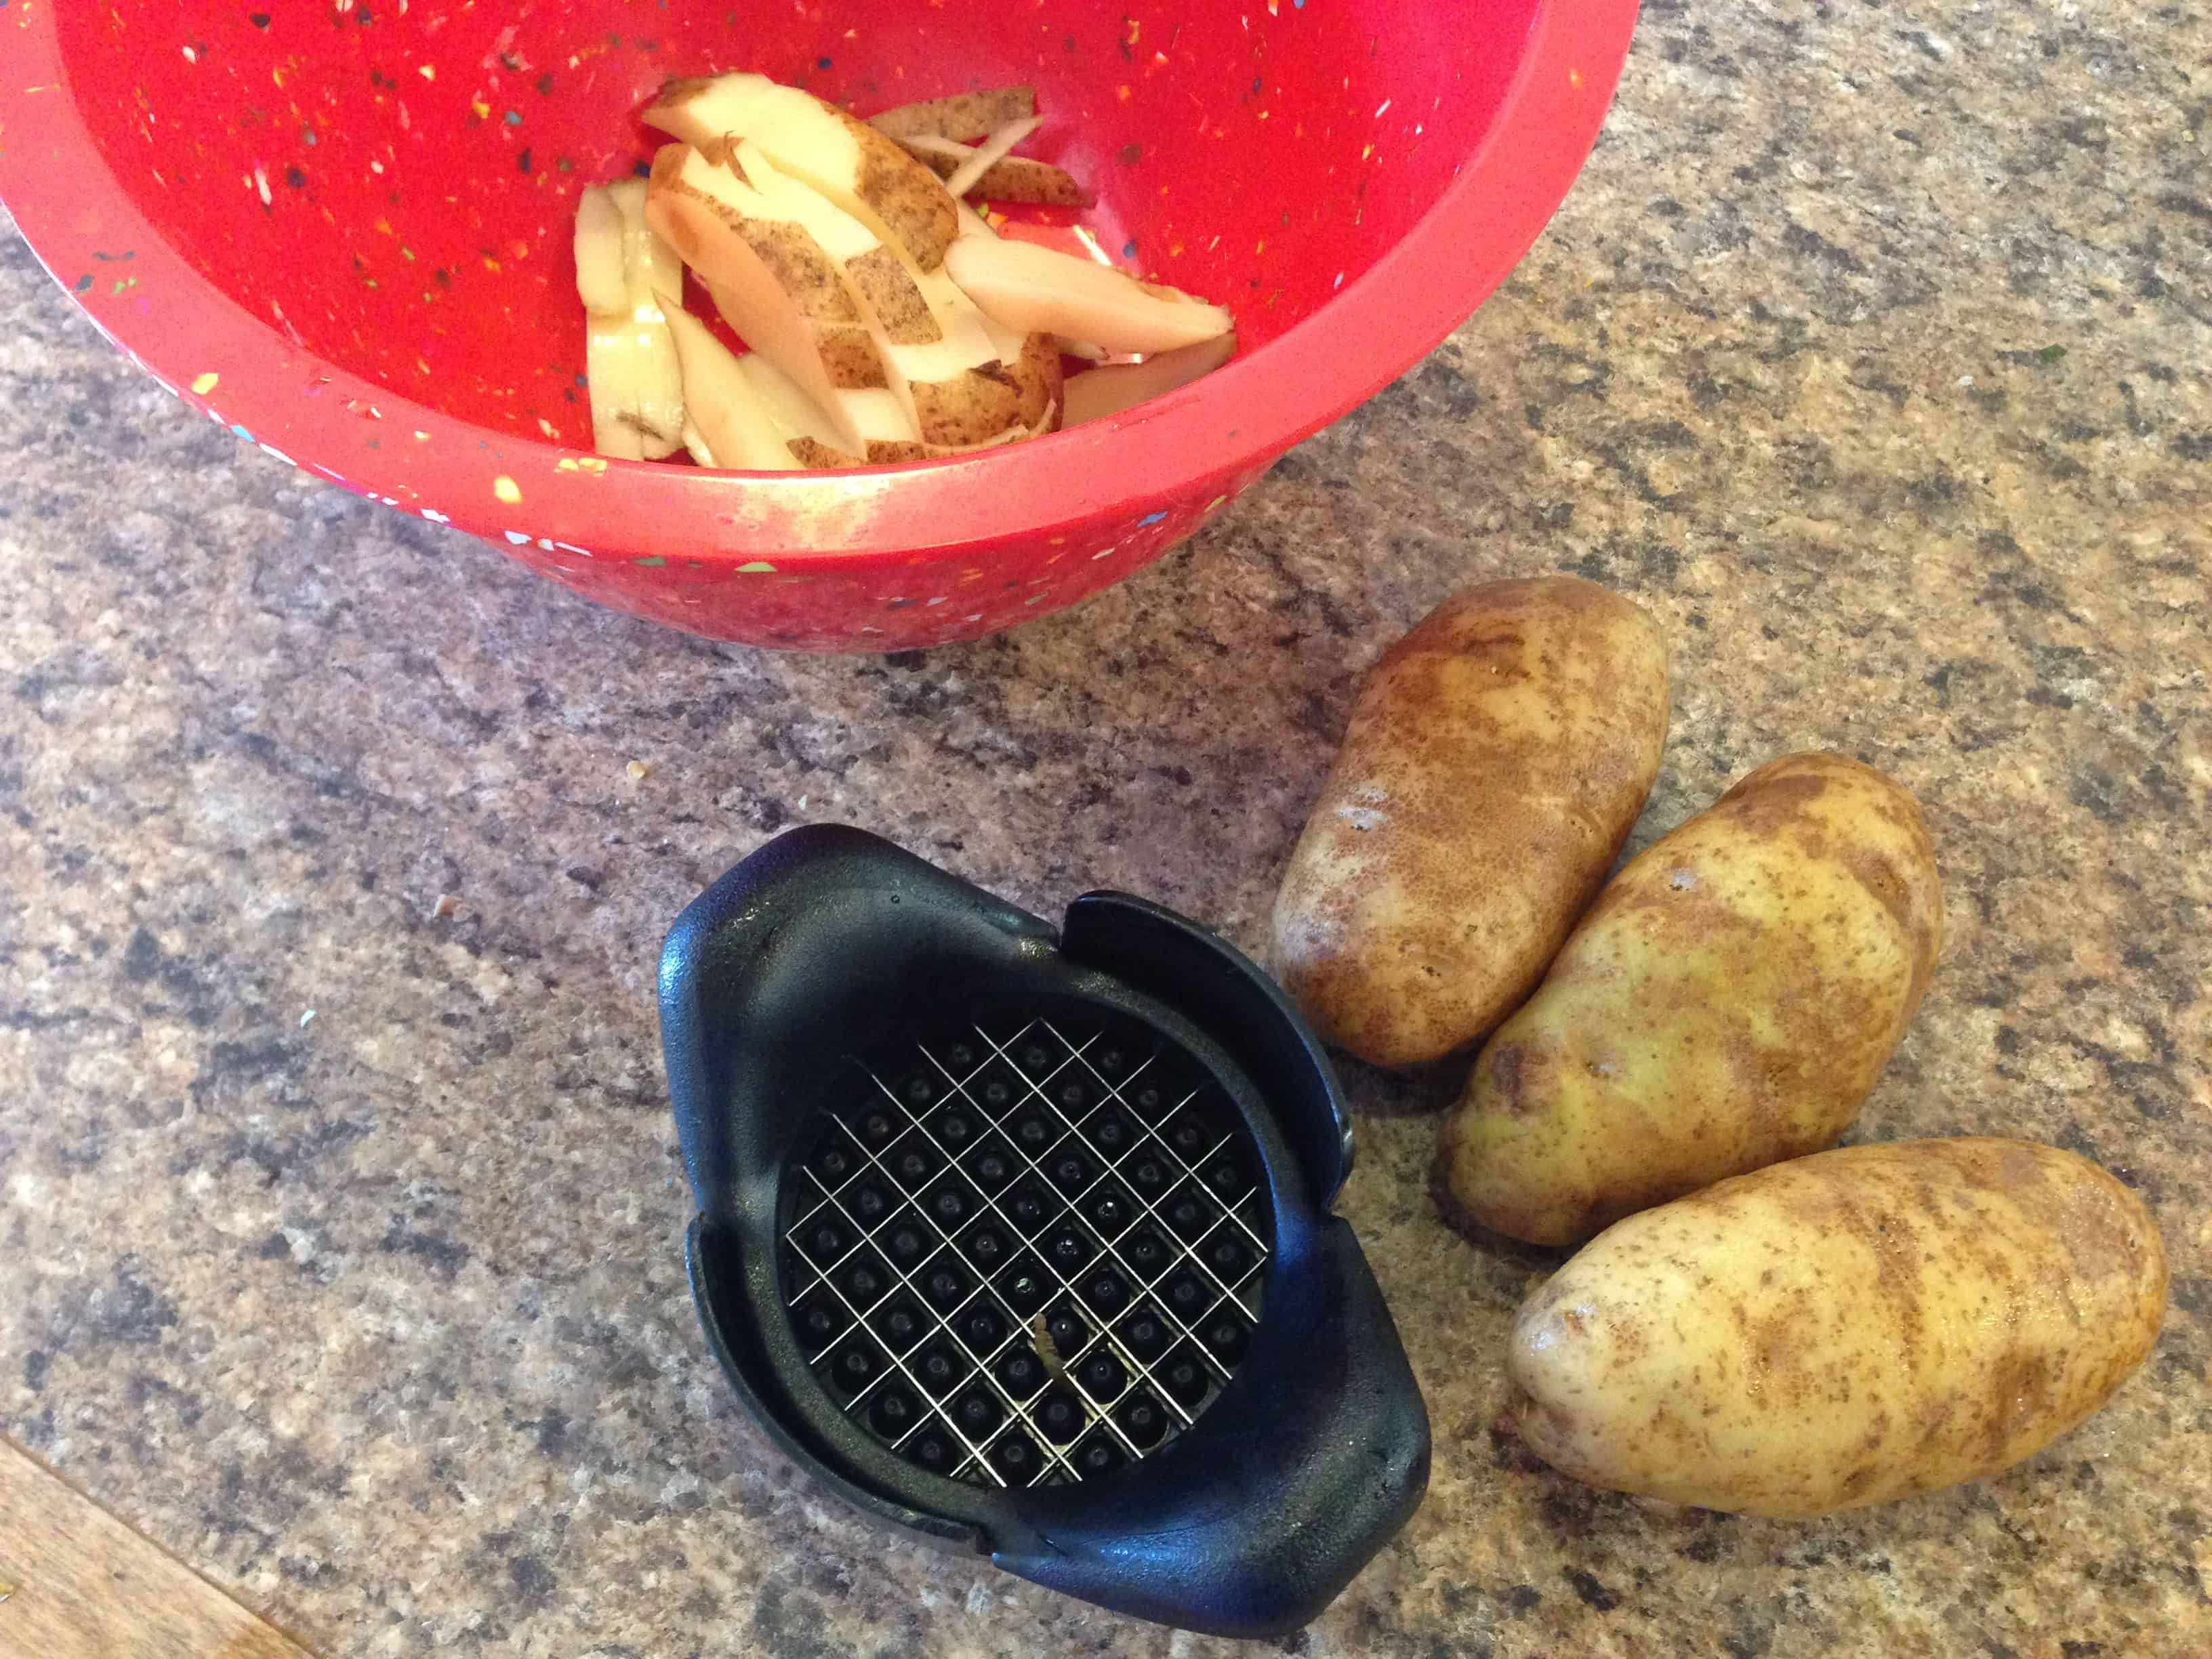 Getting ready to cut potatoes for french fries